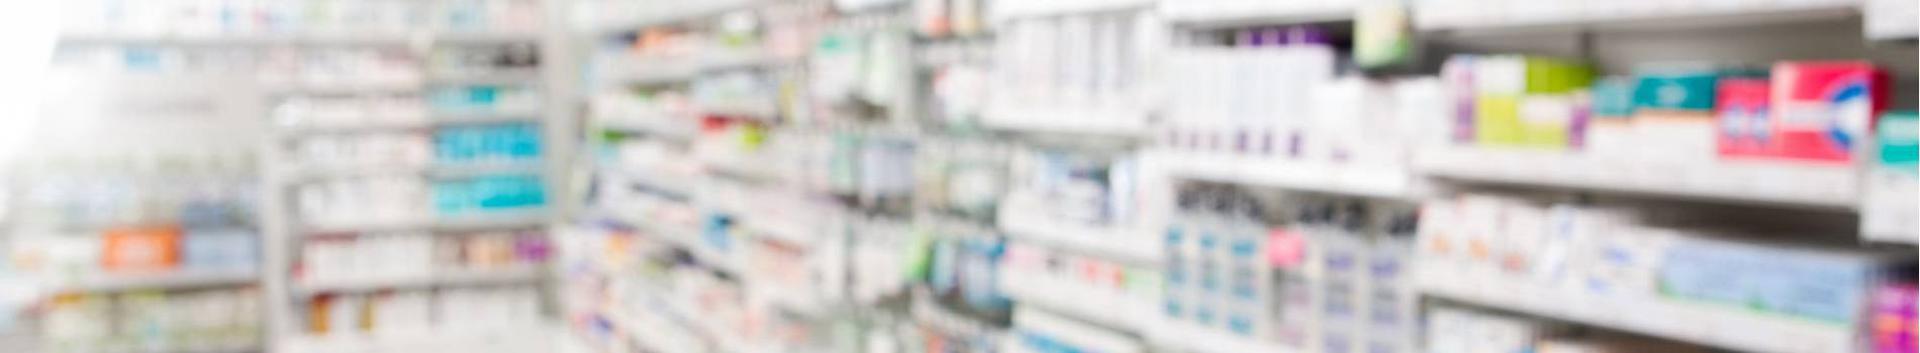 pharmacies and other related services, products, consultations